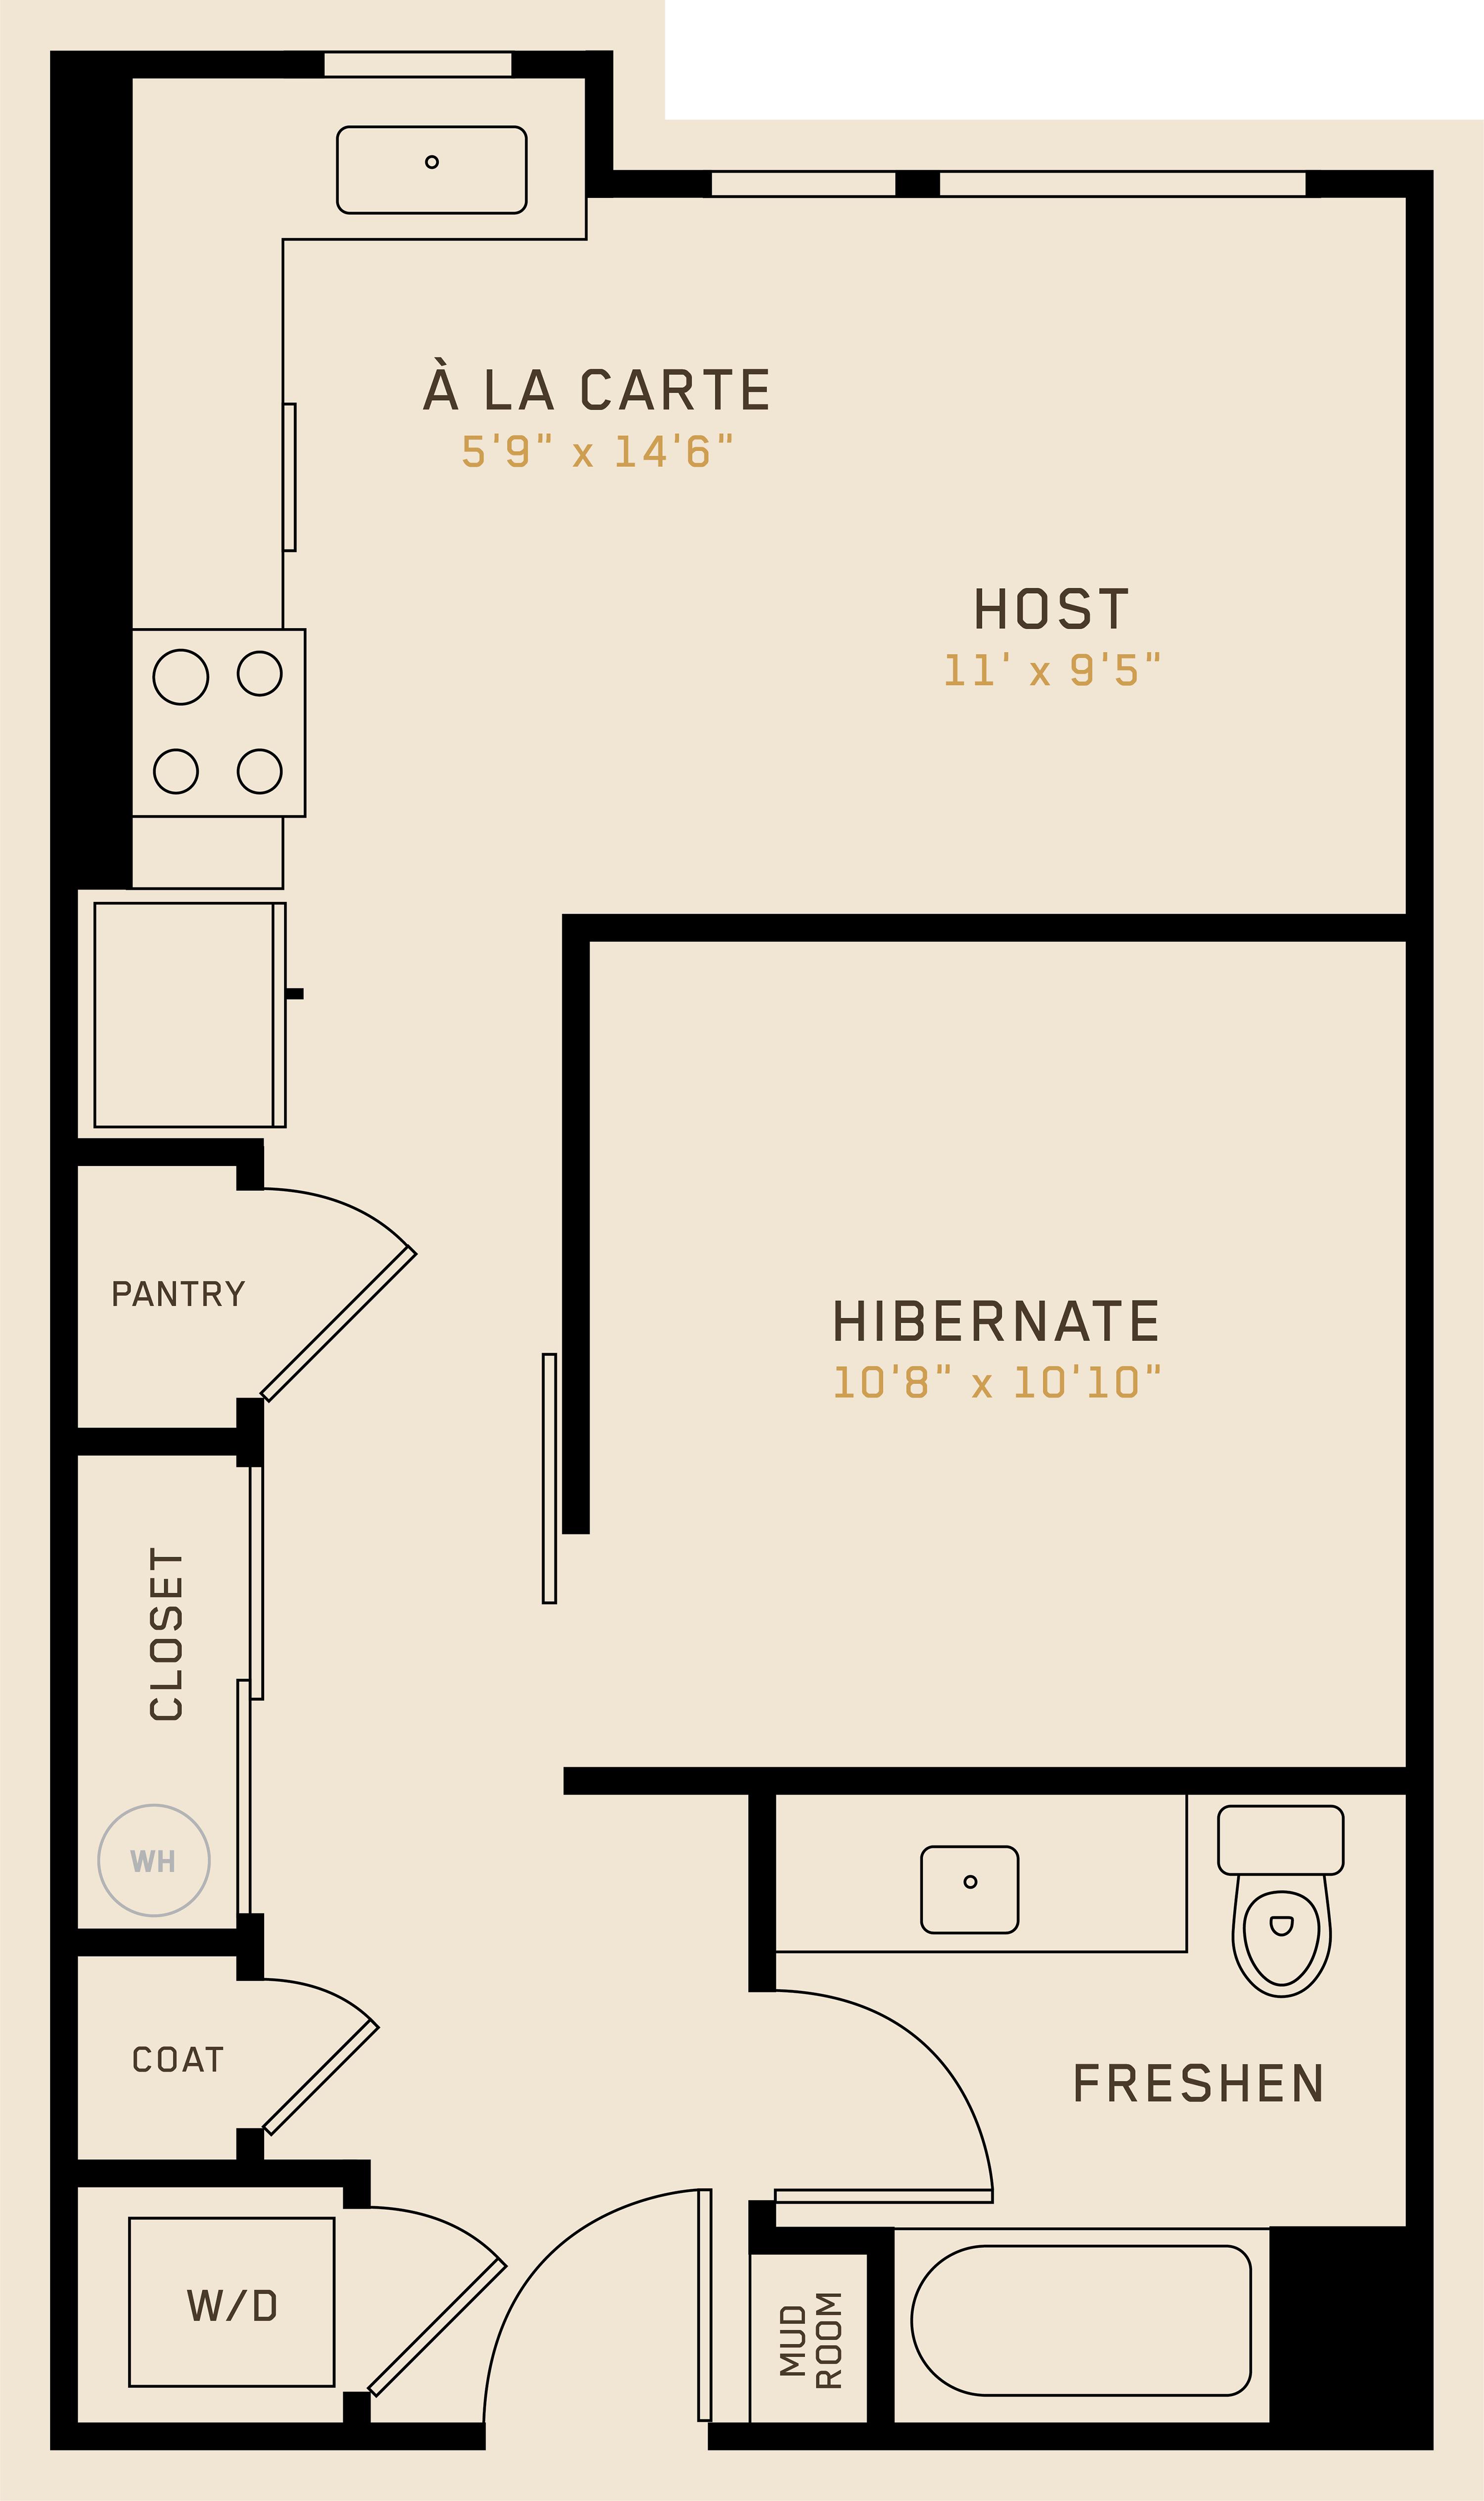 S1D floor plan featuring 1 bedroom, 1 bathroom, and is 562 square feet